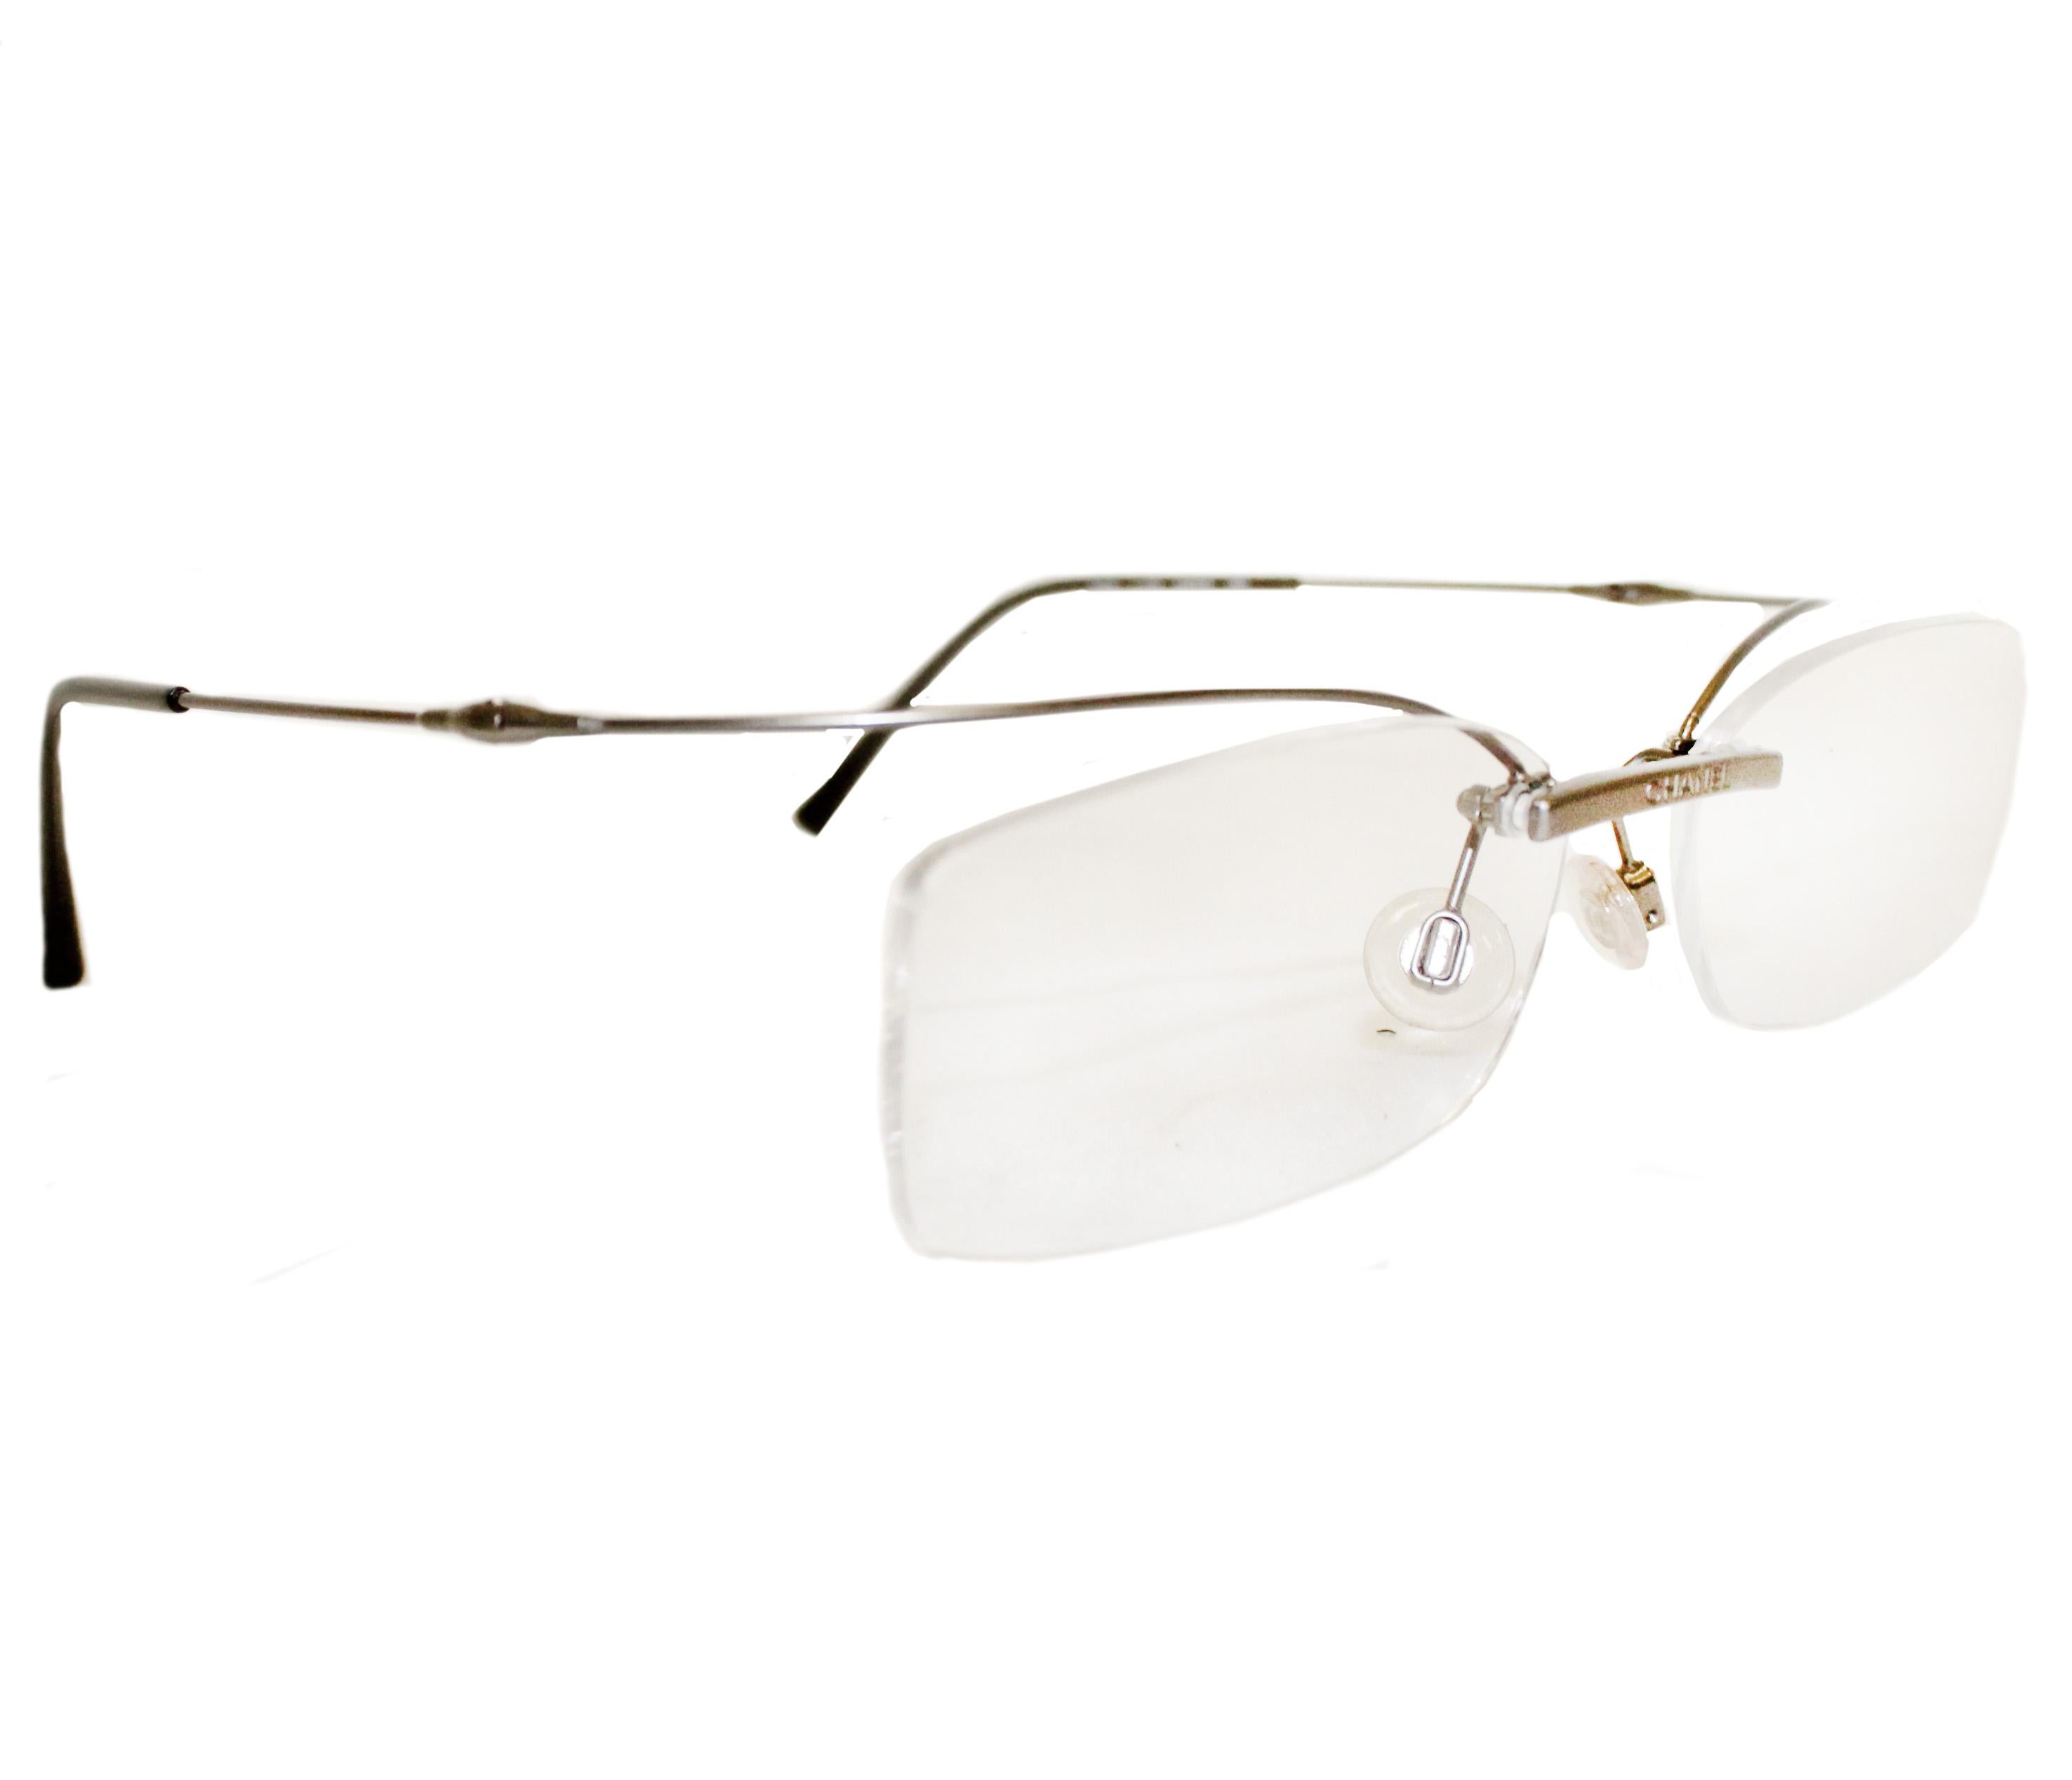 Chanel rimless metal temple 2033 C172 54 016 120 eyeglasses contain tremblant  floating temples in silver tone.   The lenses can be changed to your own prescription.  Glasses in excellent condition.  It comes with its own Chanel case.  Made in Italy.